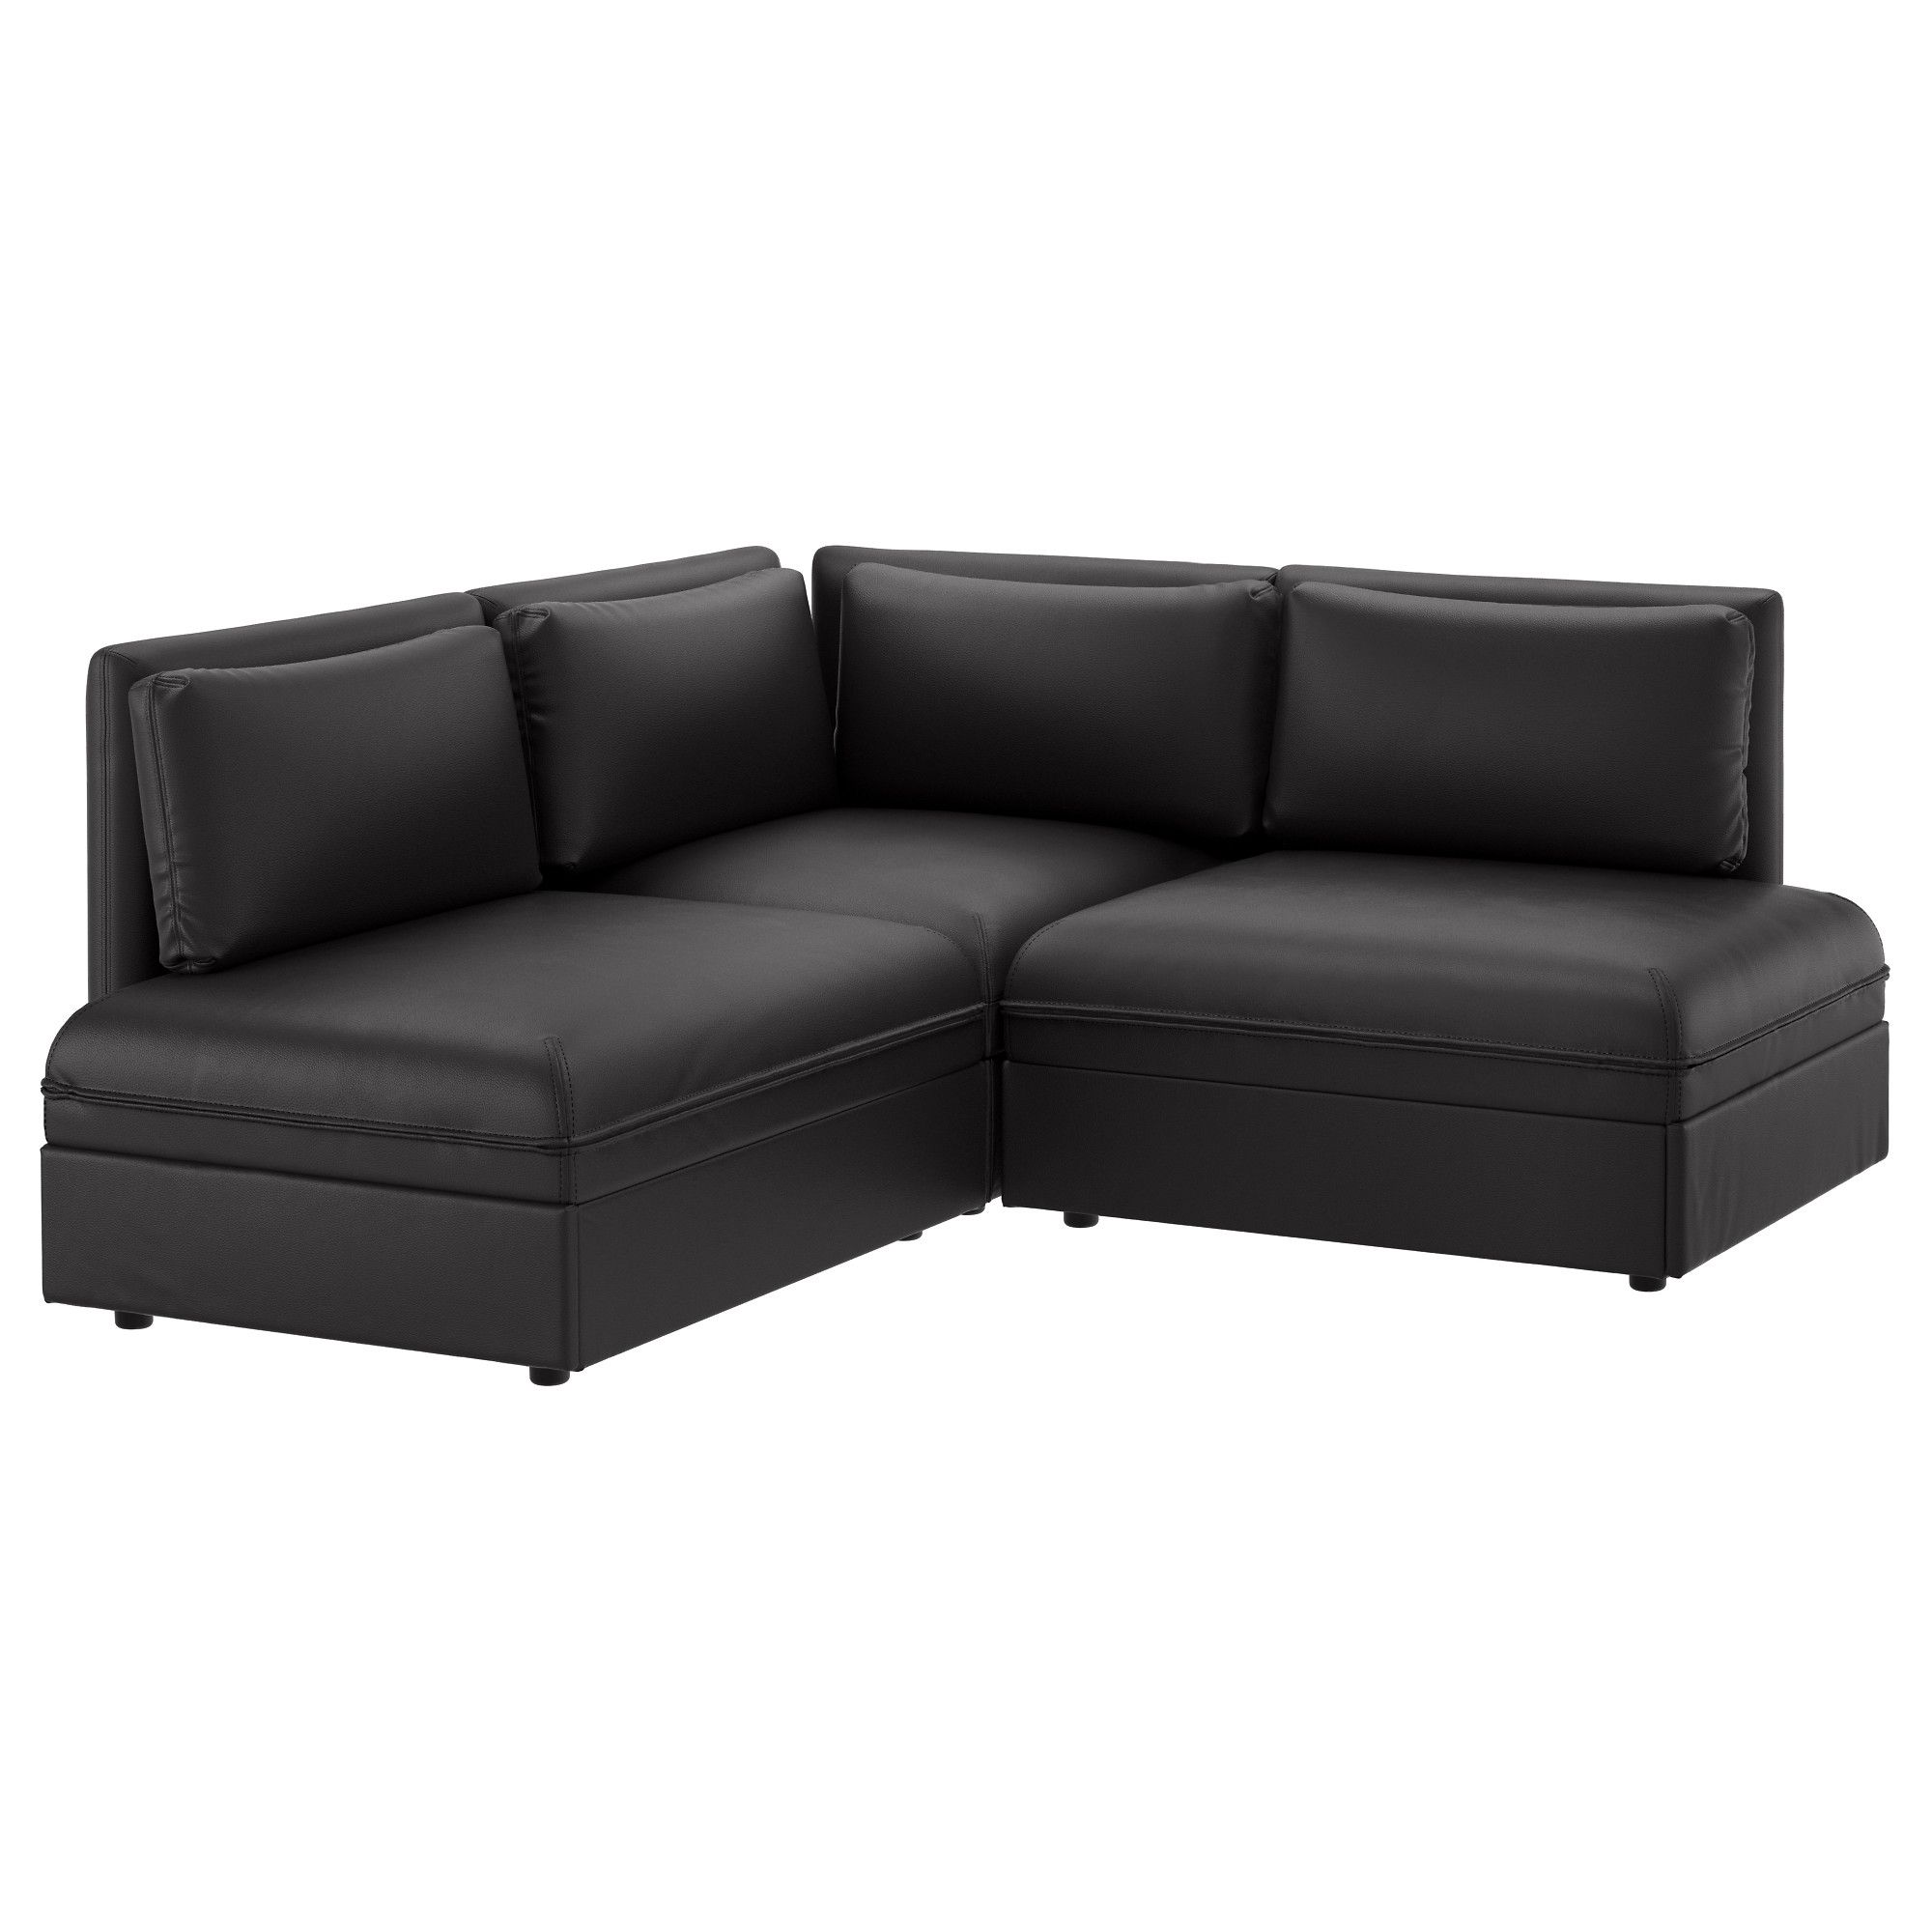 Obtuse Angle Sectional Sofa Rs Gold Sofa Pertaining To 45 Degree Sectional Sofa (View 11 of 15)